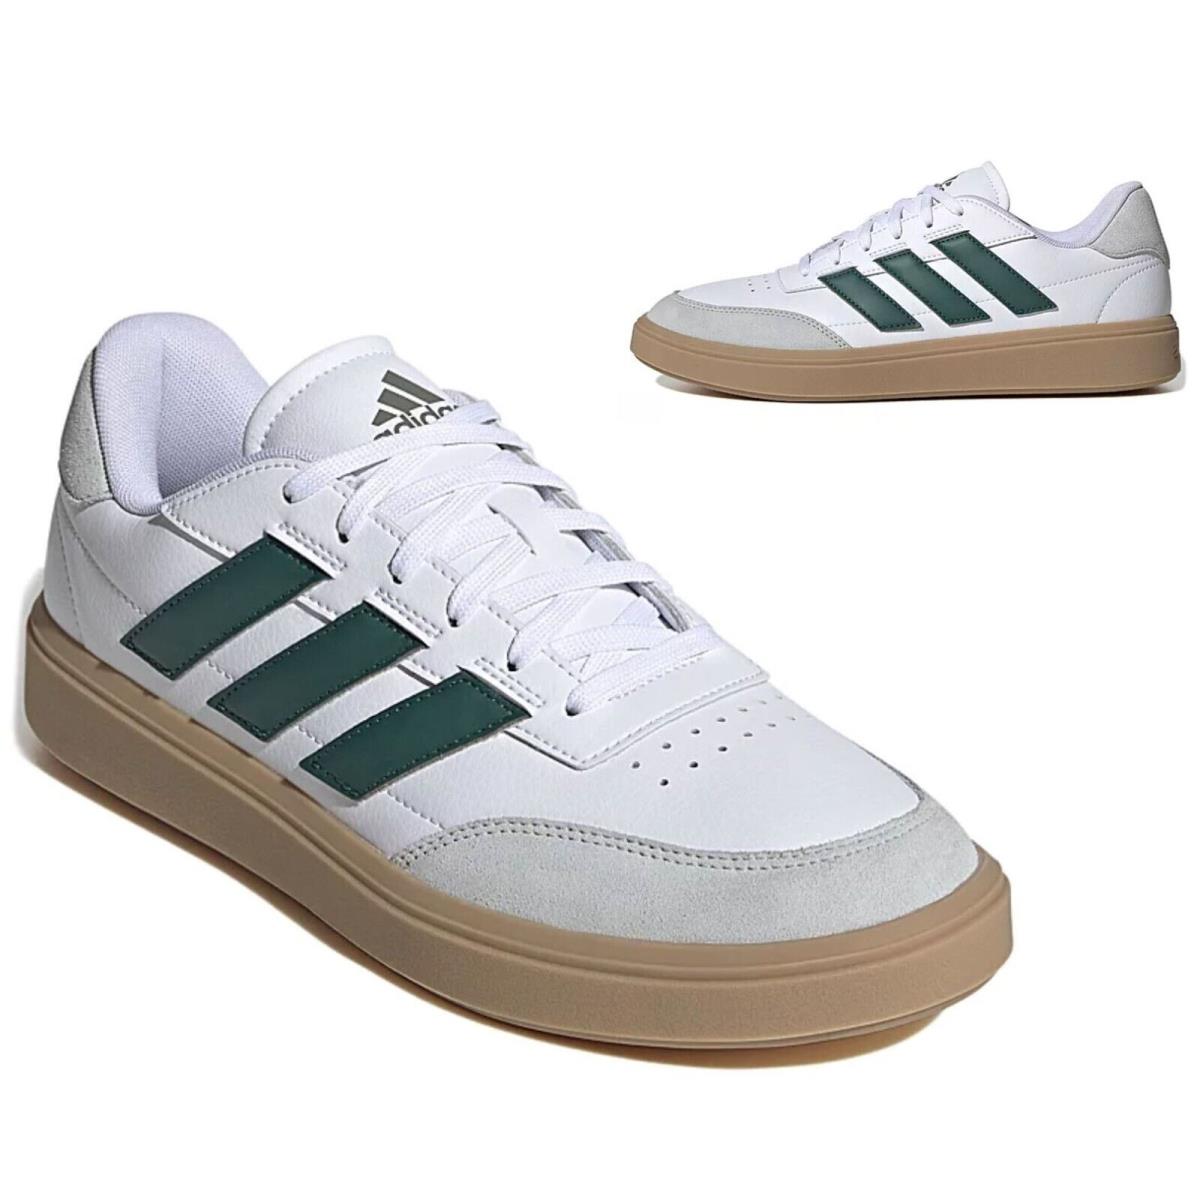 Adidas Courtblock Athletic Sneaker Casual Shoes Mens White Green All Sizes